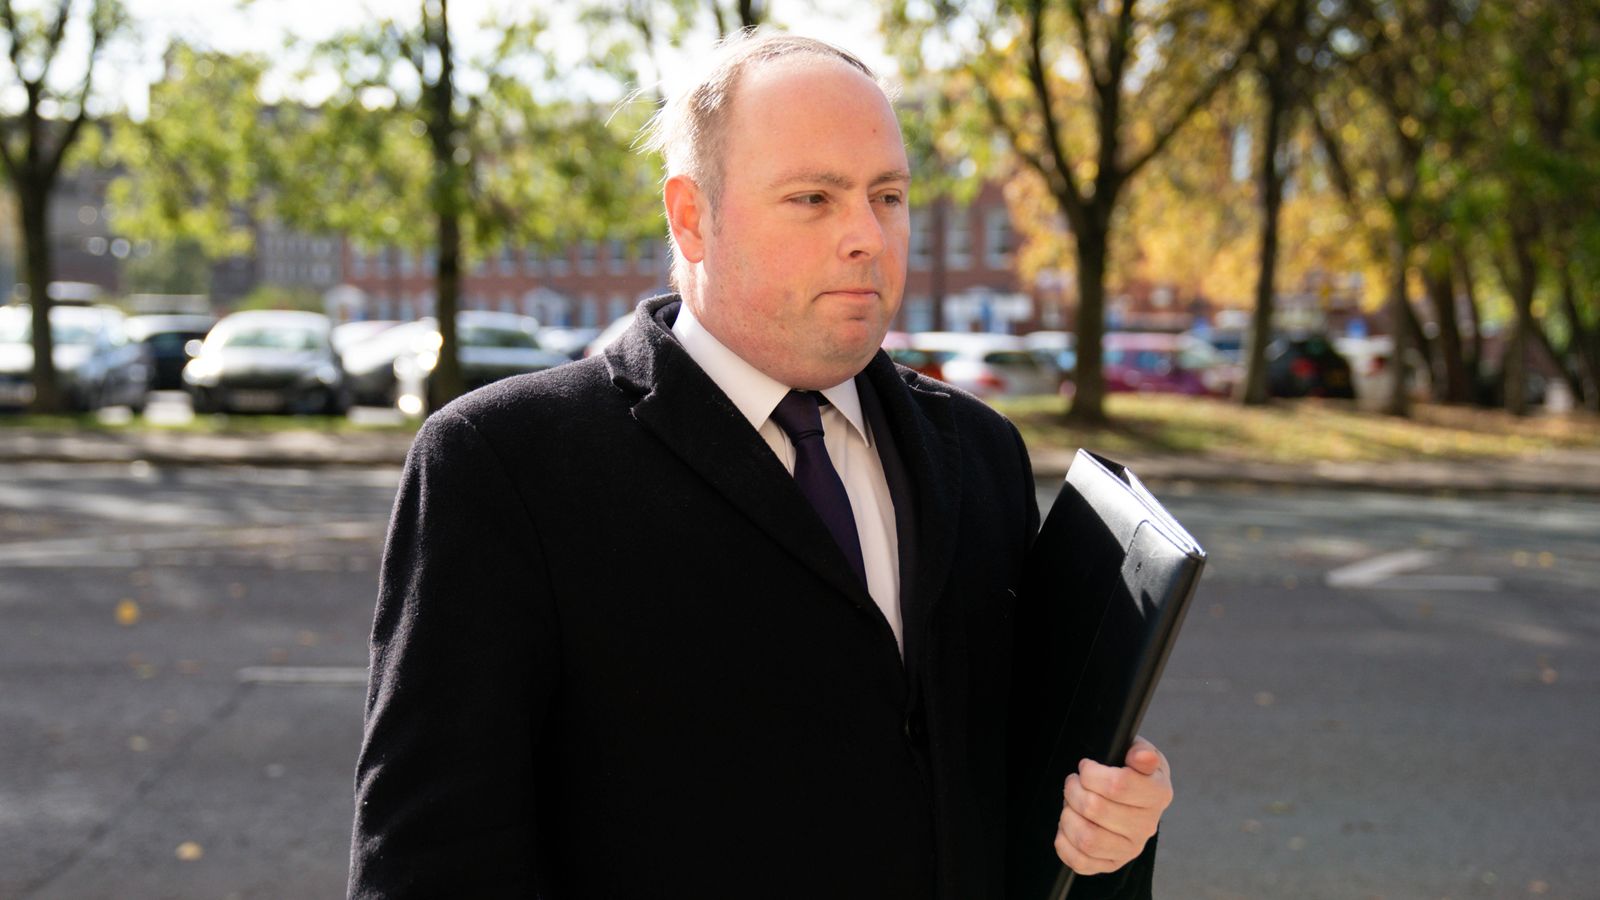 Former Tory MP David Mackintosh failed to declare source of political donations, court told